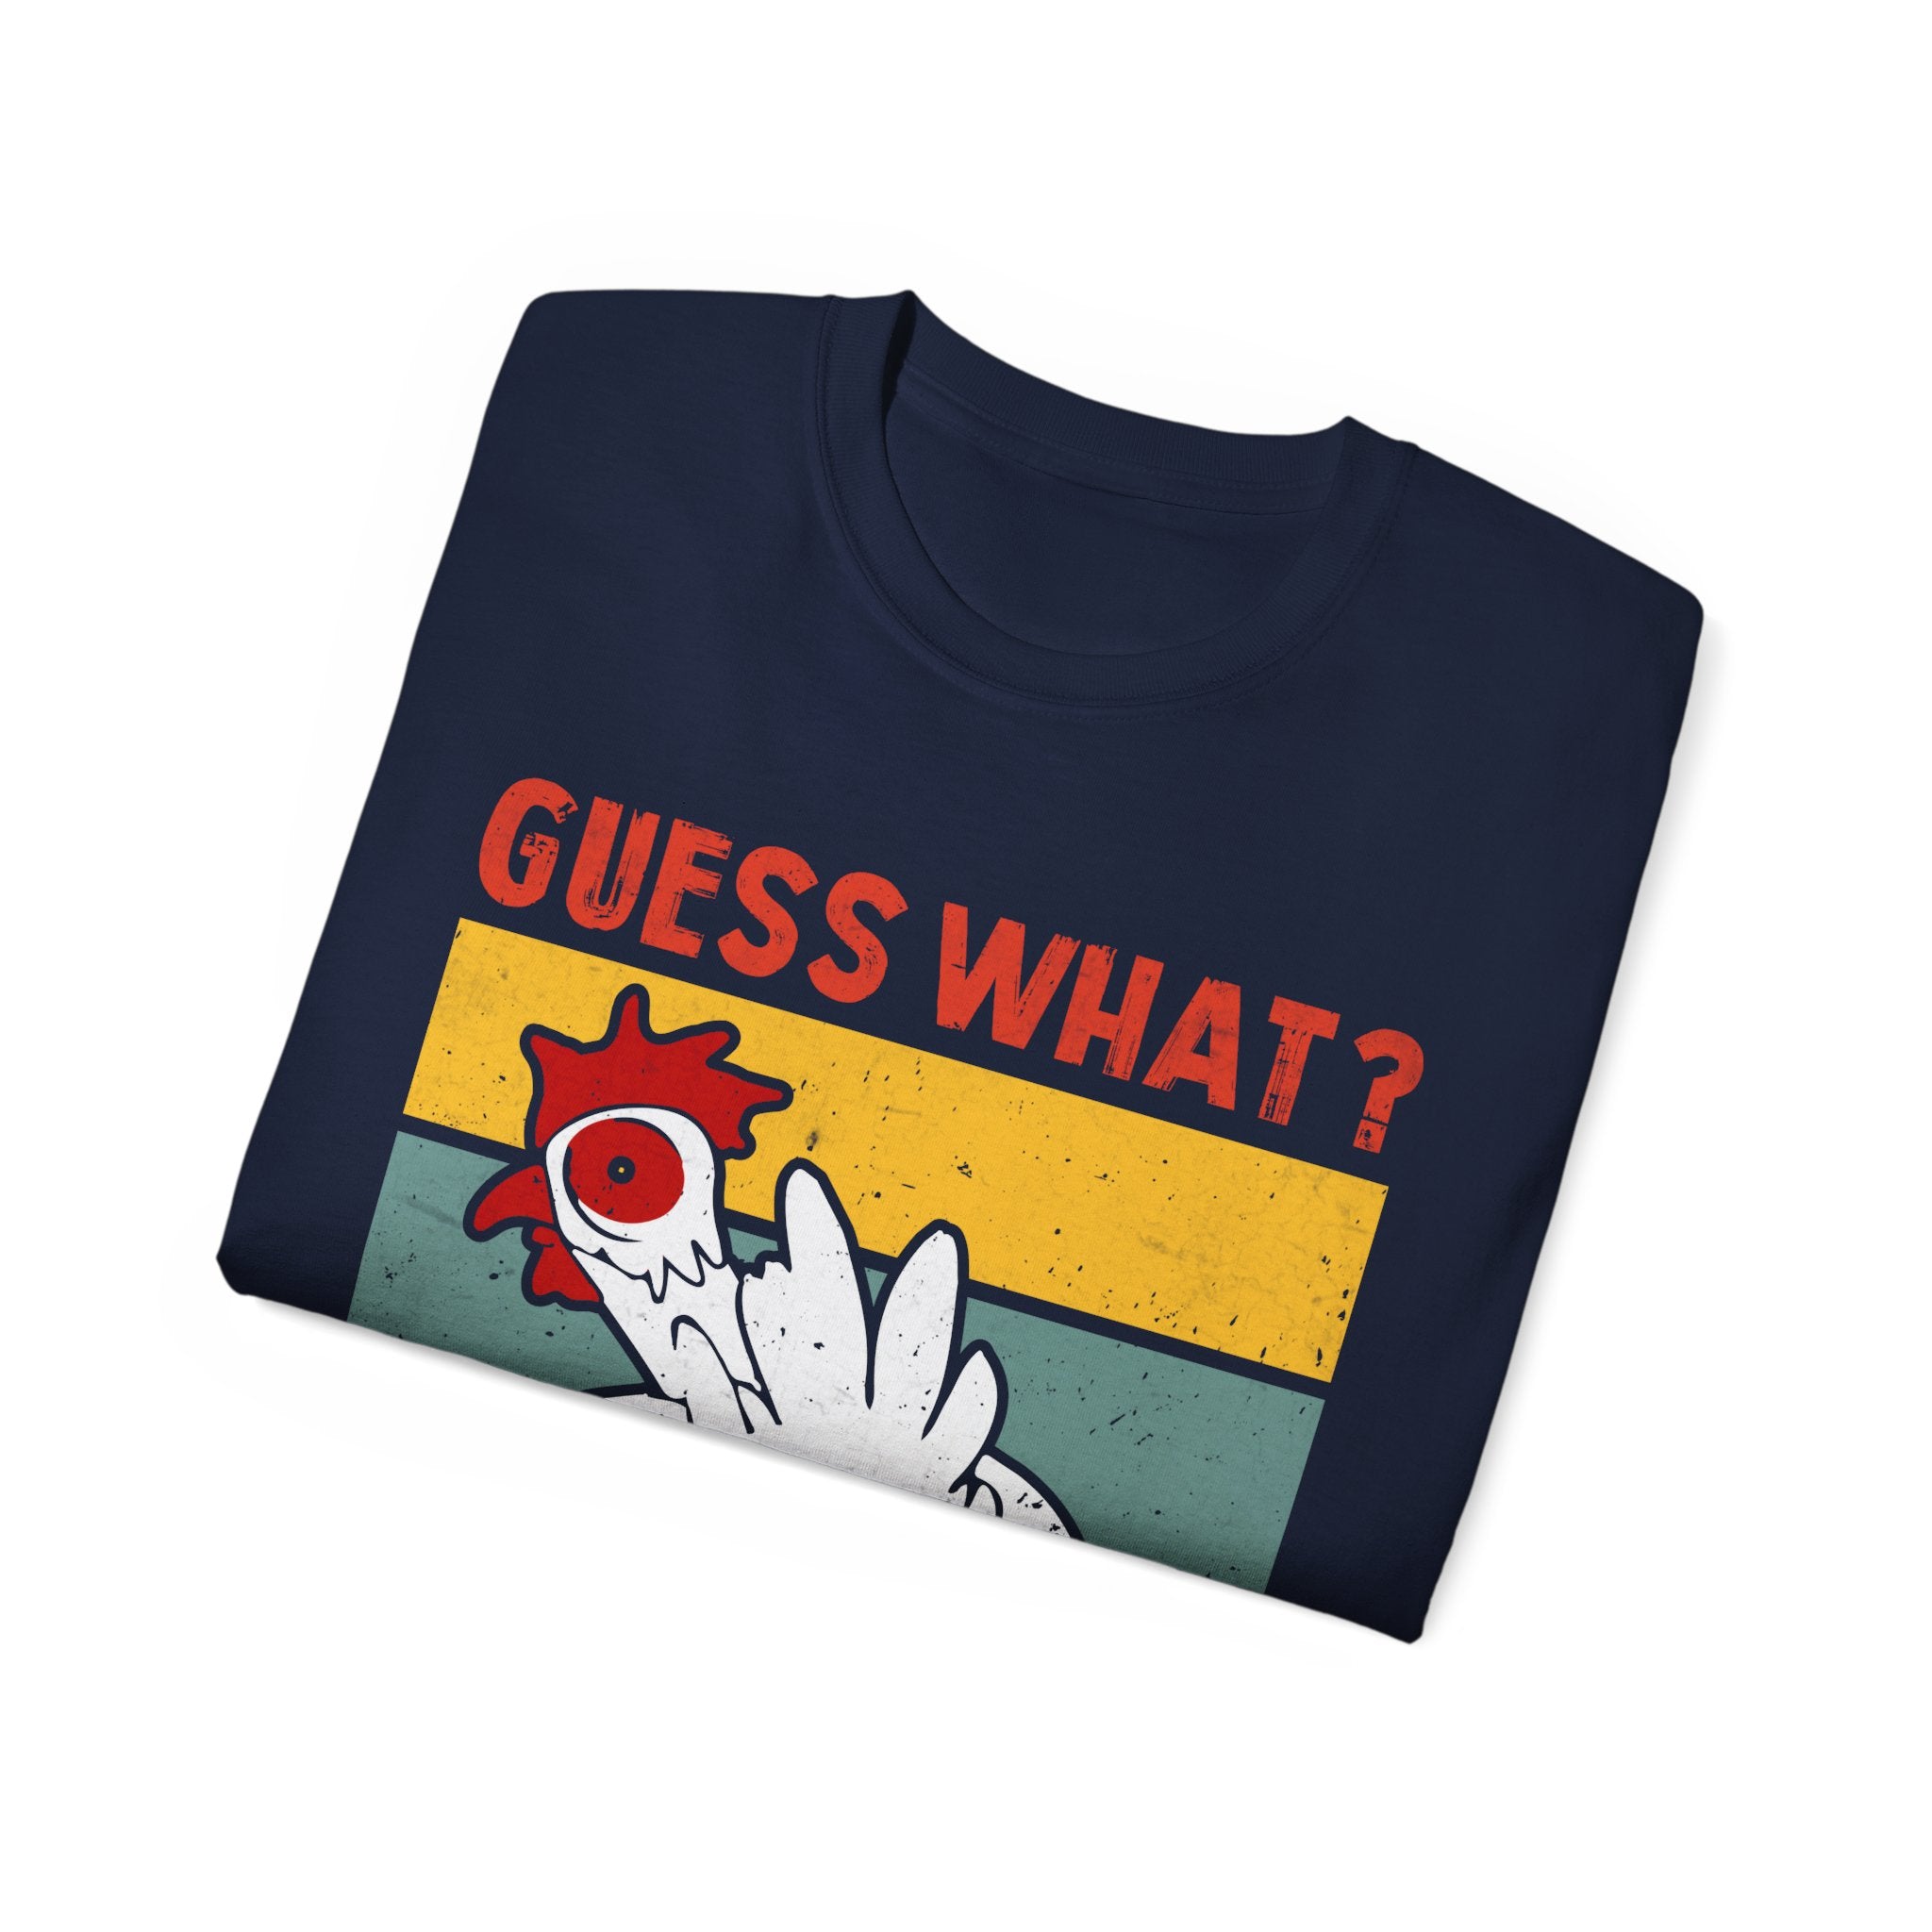 "Guess What? Chicken Butt." Unisex Ultra Cotton Tee - Classic Humor Meets Comfortable Style perfect way to lighten the mood at casual gatherings, family events, or any day you feel like spreading cheer